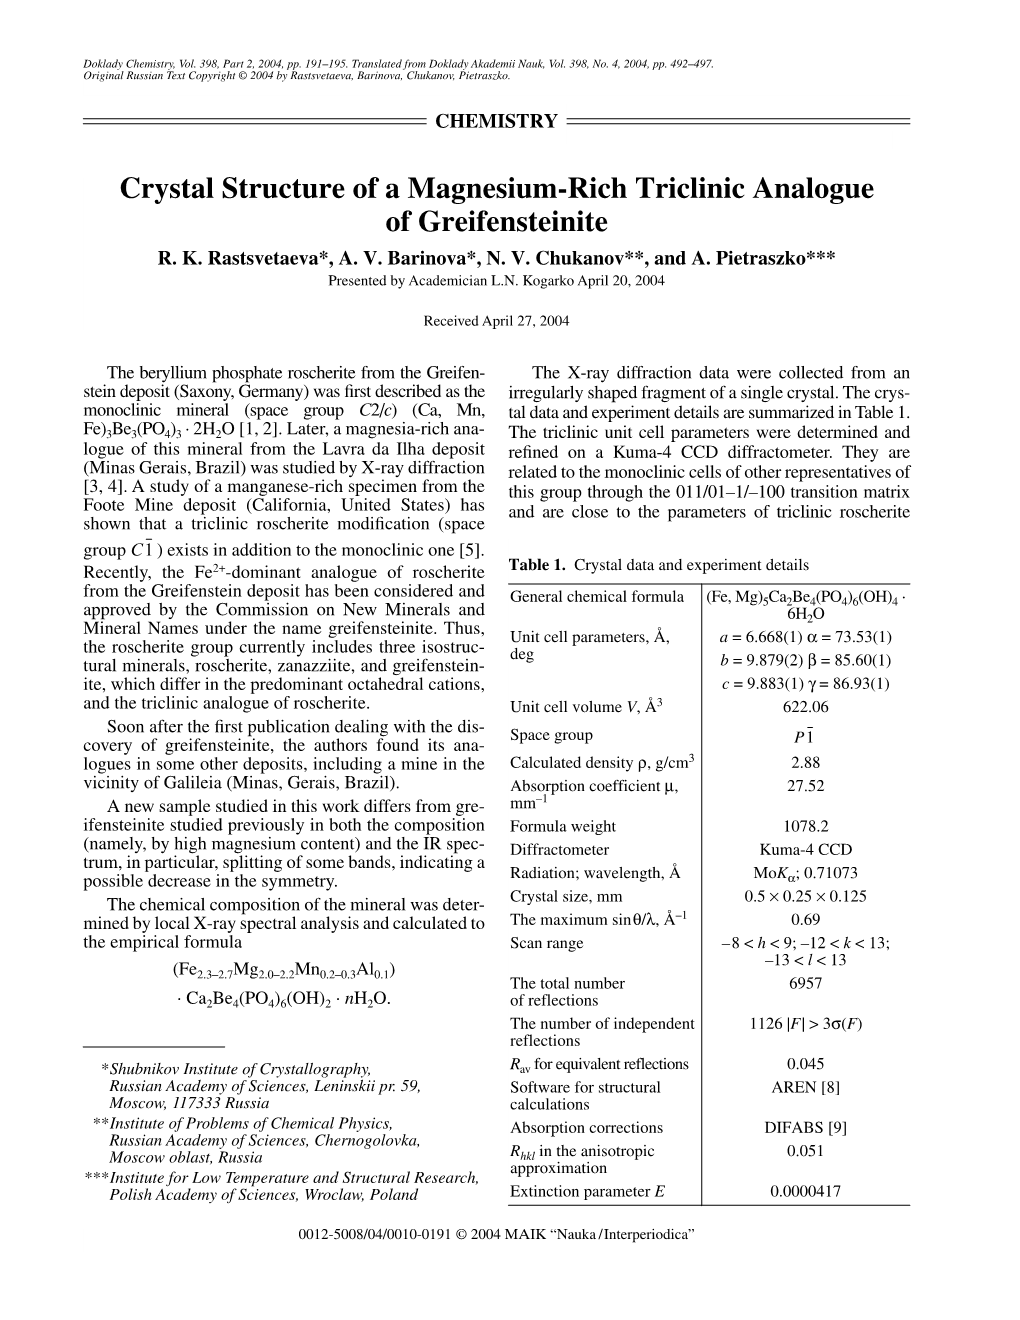 Crystal Structure of a Magnesium-Rich Triclinic Analogue of Greifensteinite R